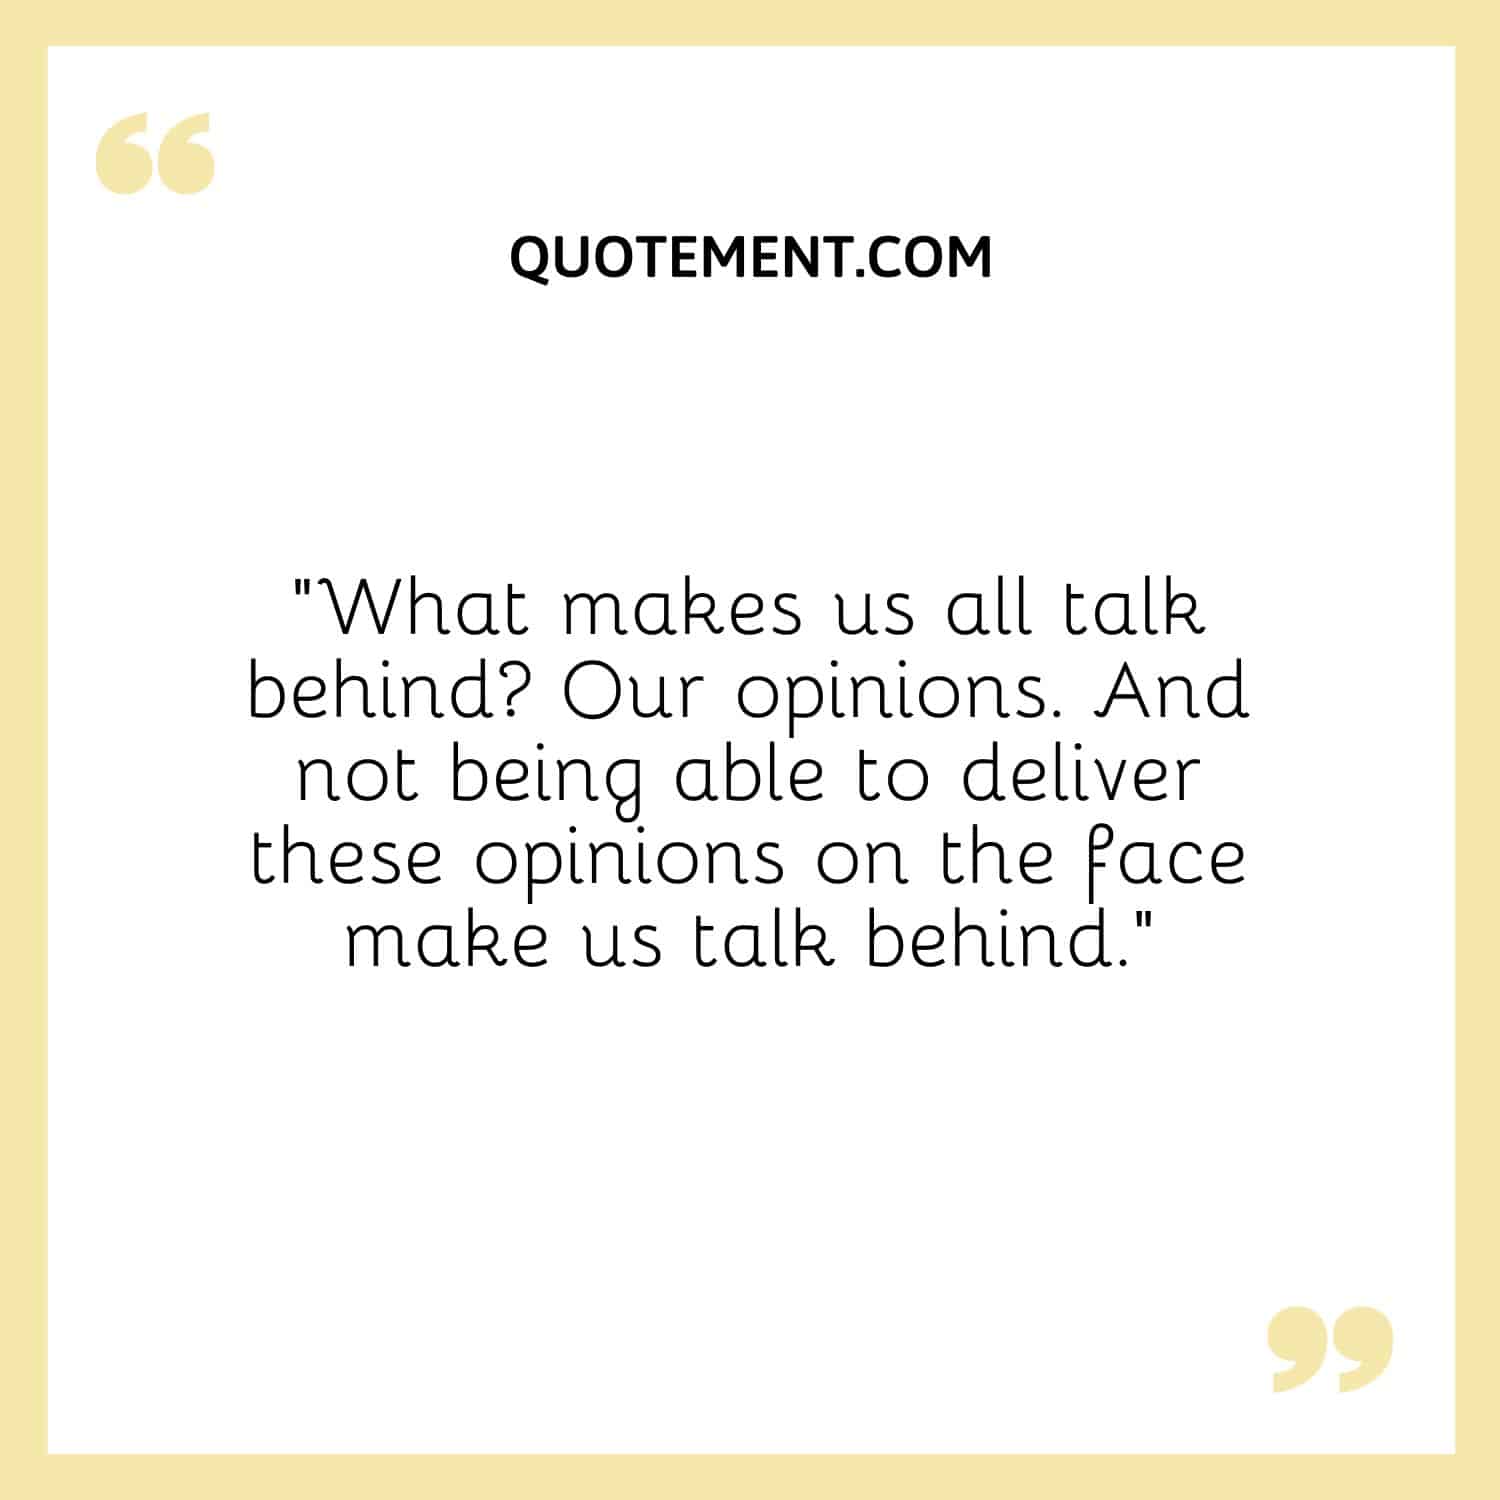 “What makes us all talk behind Our opinions. And not being able to deliver these opinions on the face make us talk behind.”